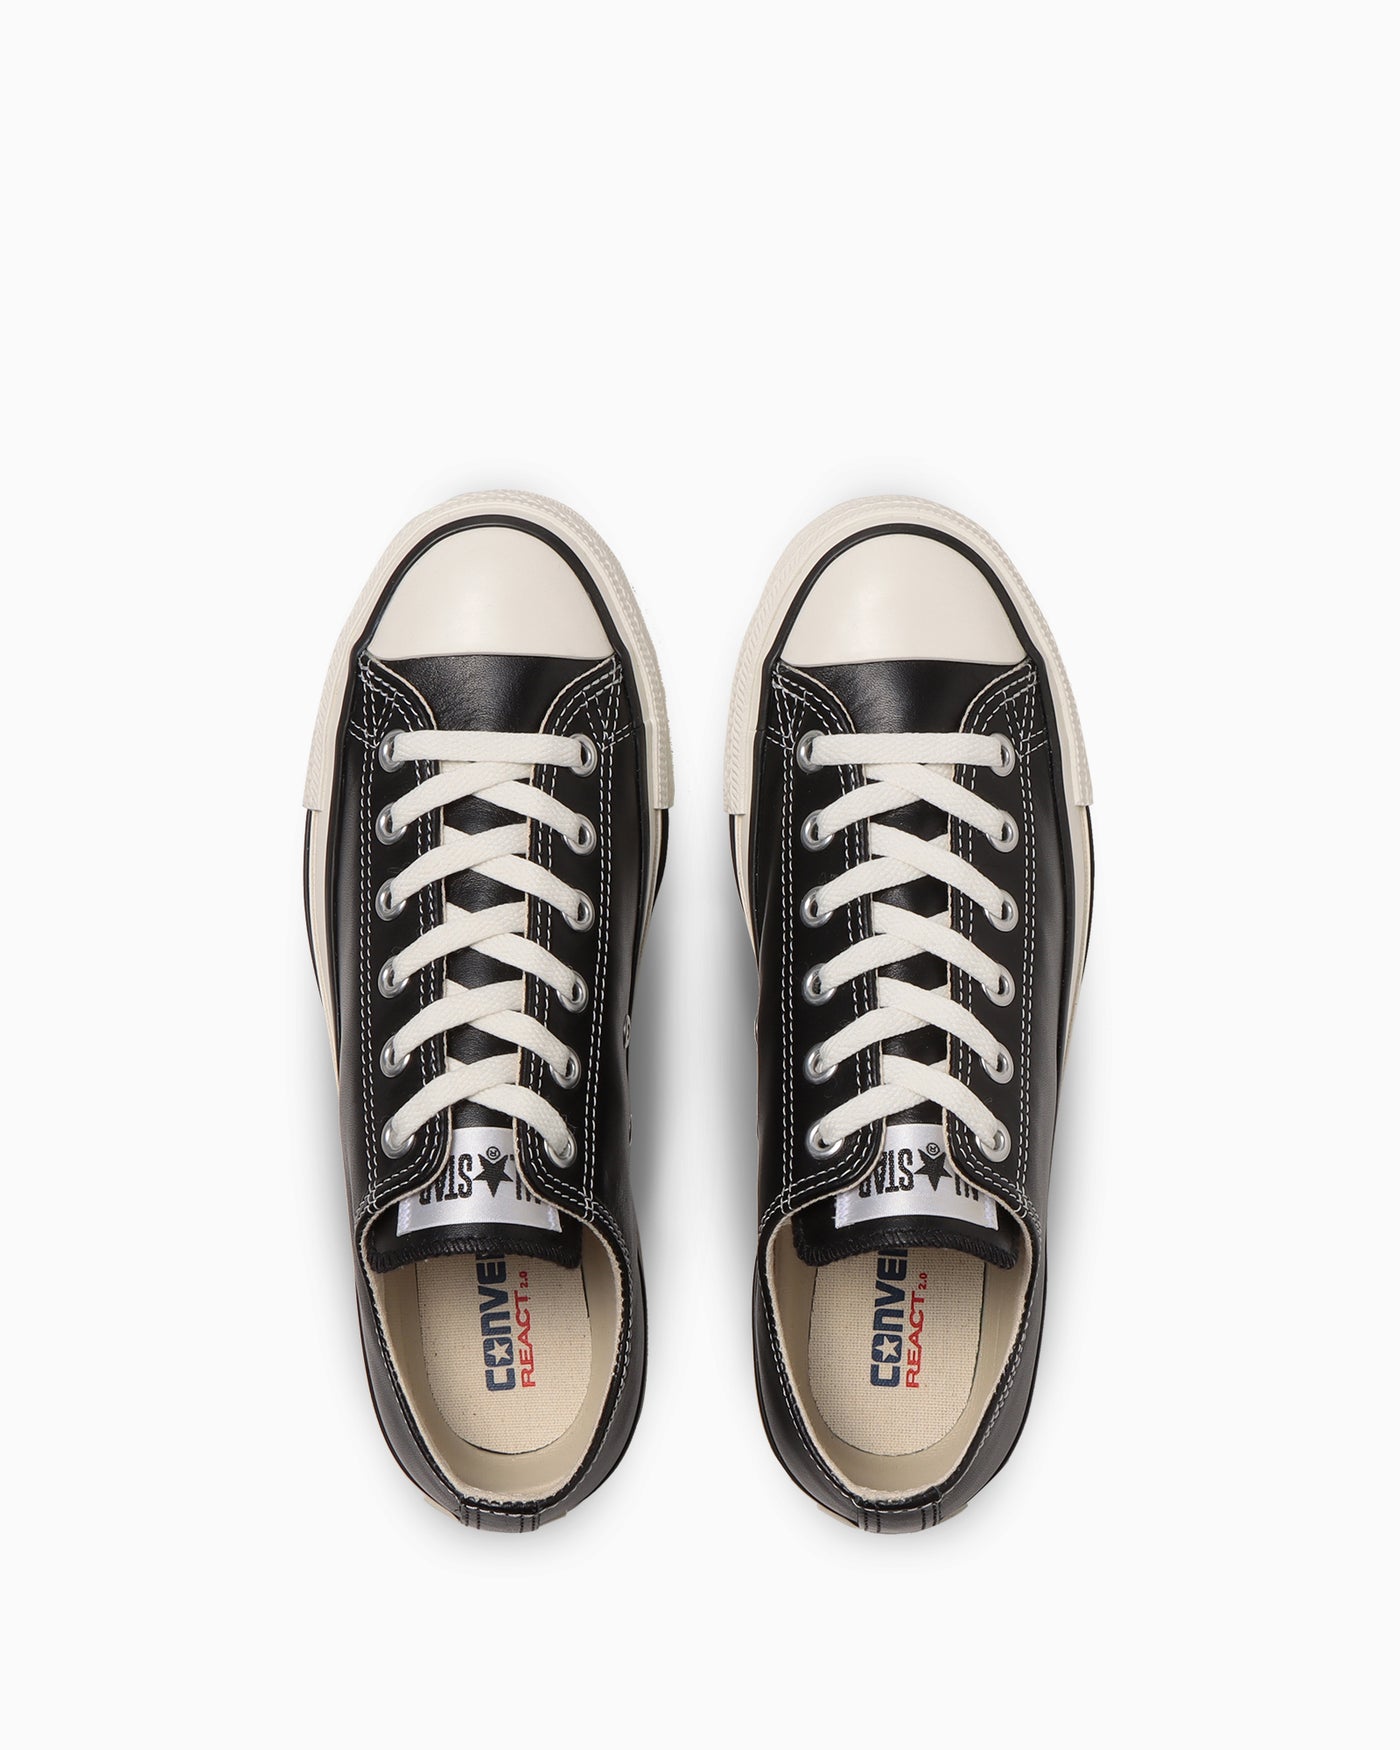 ALL STAR Ⓡ OLIVE GREEN LEATHER OX